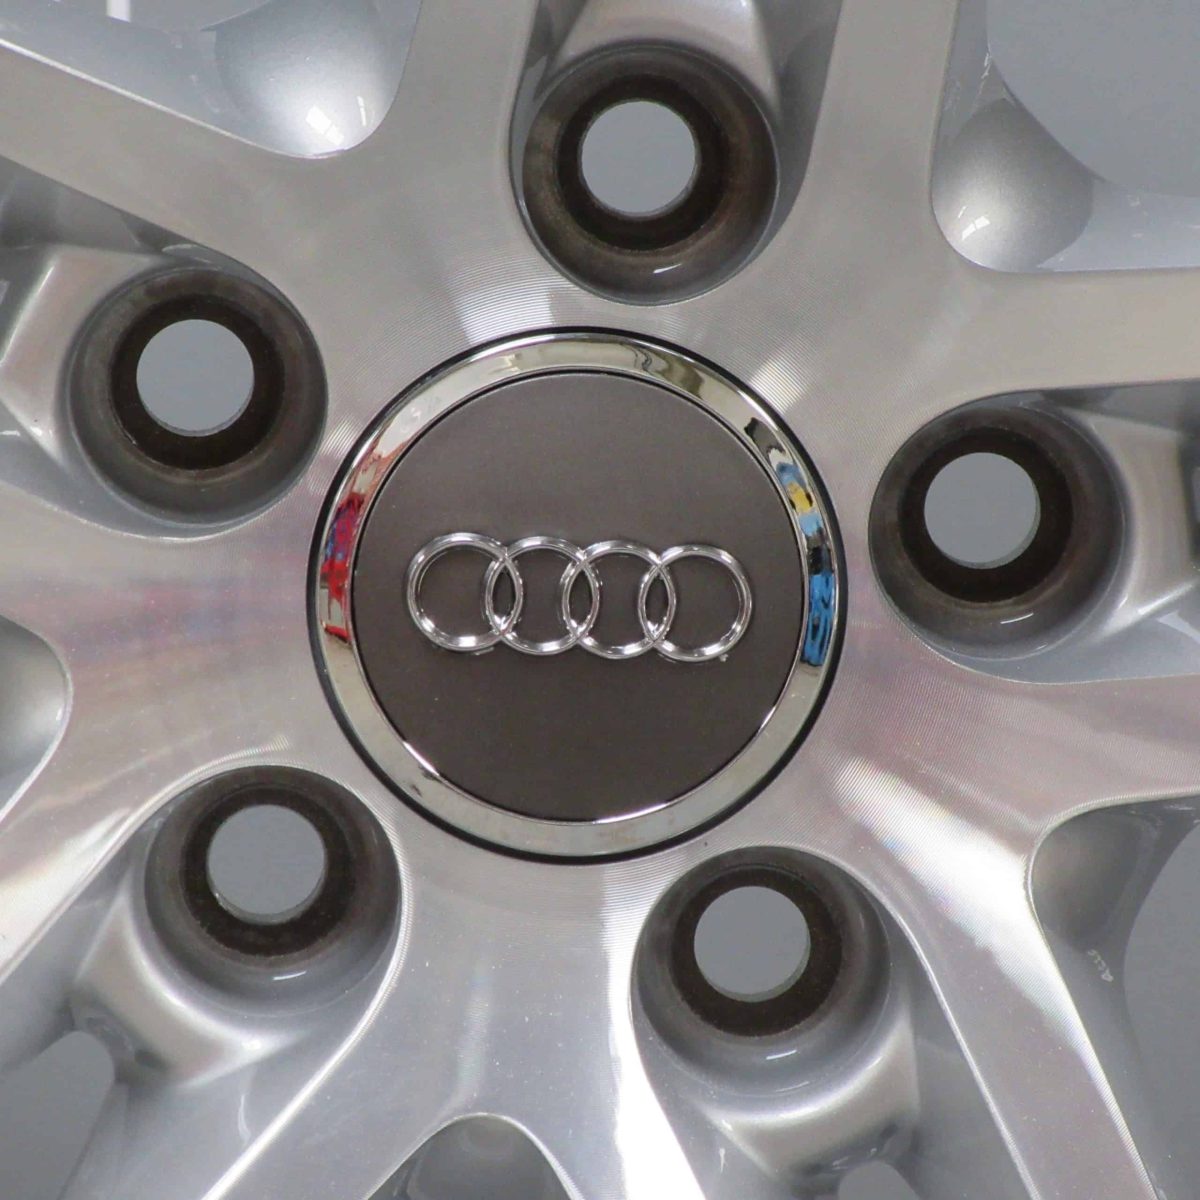 Genuine Audi R8 5 Twin Spoke 19″ Inch Alloy Wheels with Silver & Diamond Turned Finish 420 601 025 AG4 EE, 420 601 025 C